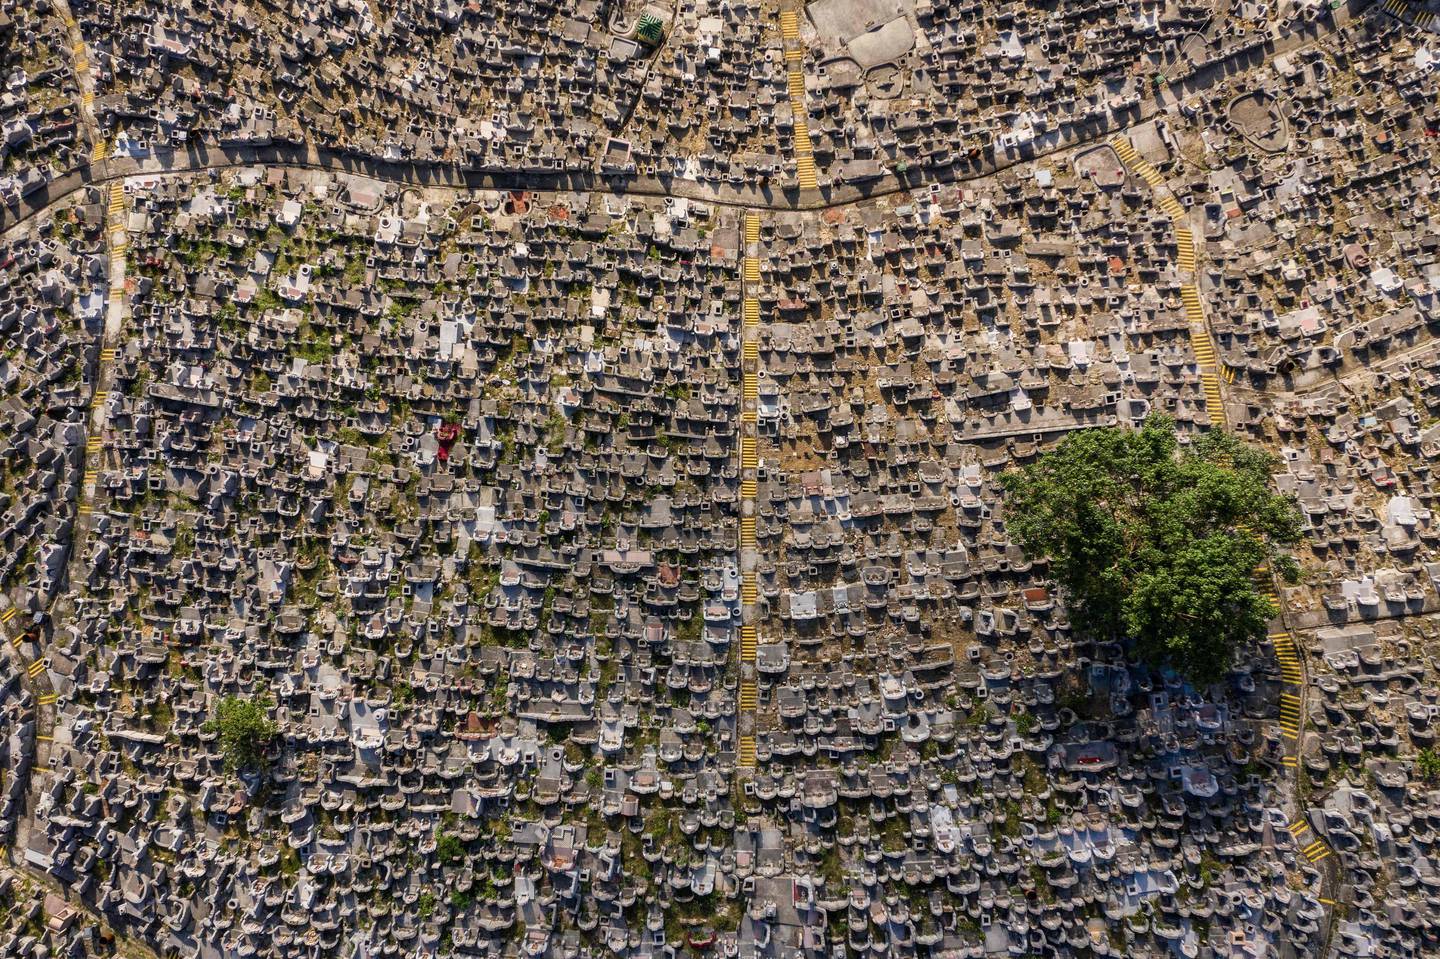 TOPSHOT - This aerial photo taken on November 5, 2018 shows a cemetery in Hong Kong. (Photo by Dale DE LA REY / AFP)